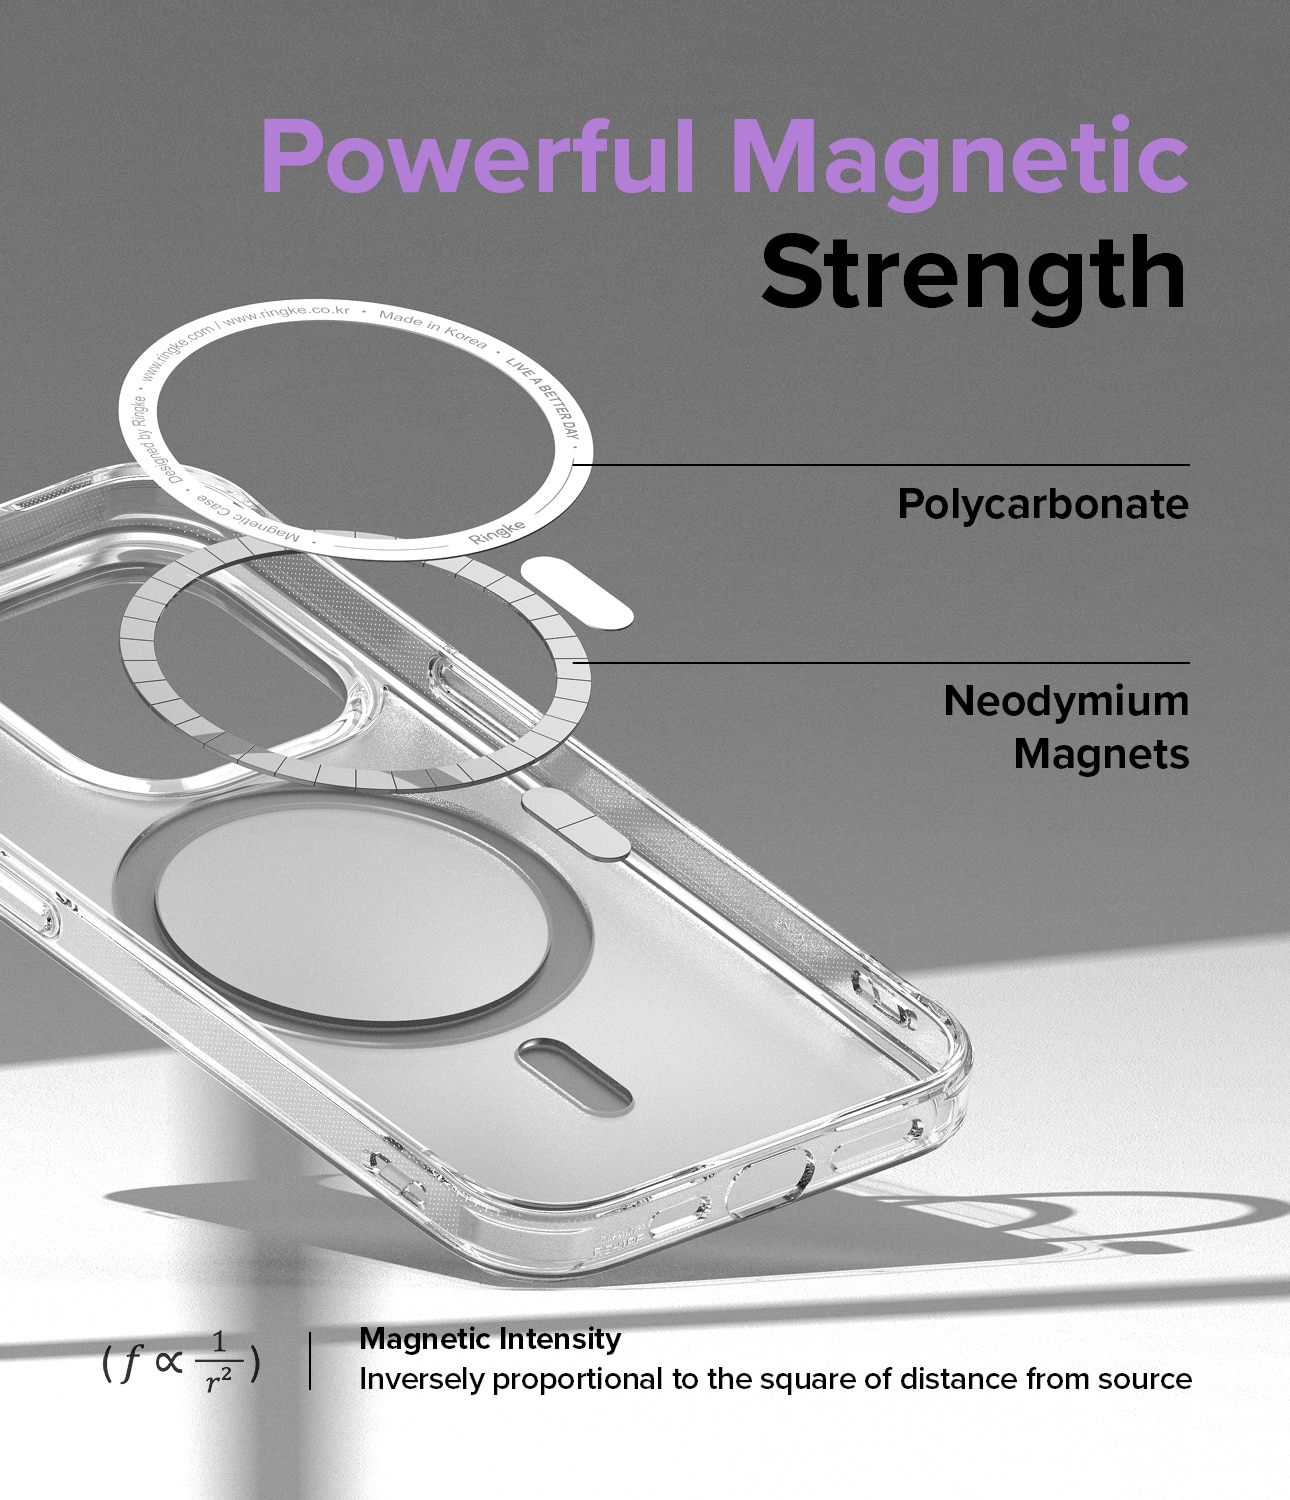 Fusion Magnetic Case iPhone 14 Pro Max Matte Clear